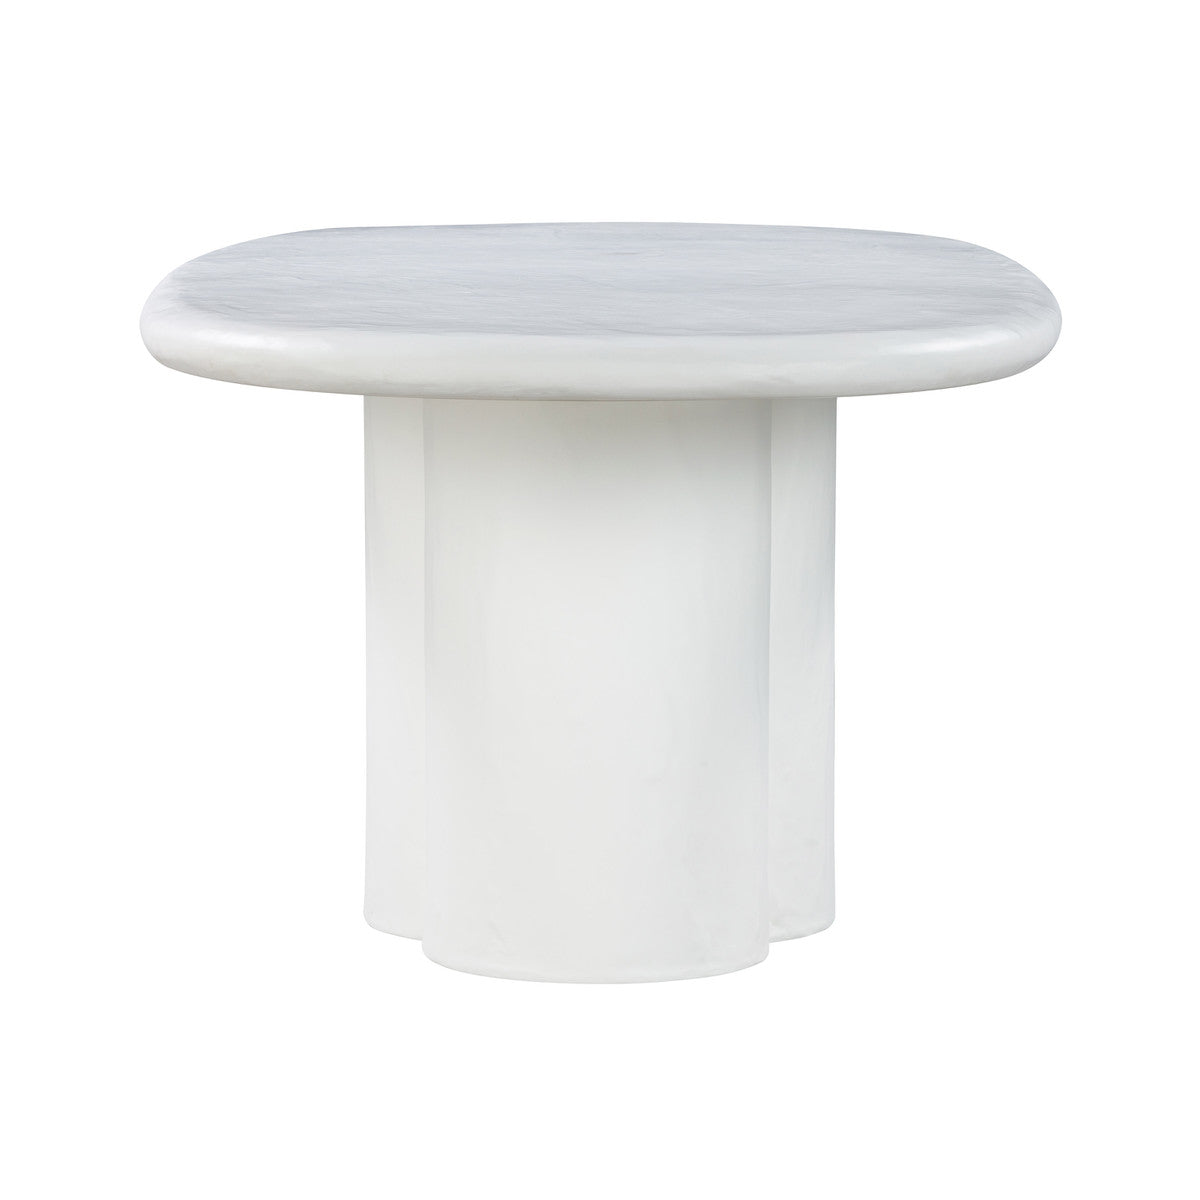 Elika Faux Plaster Oval Dining Table